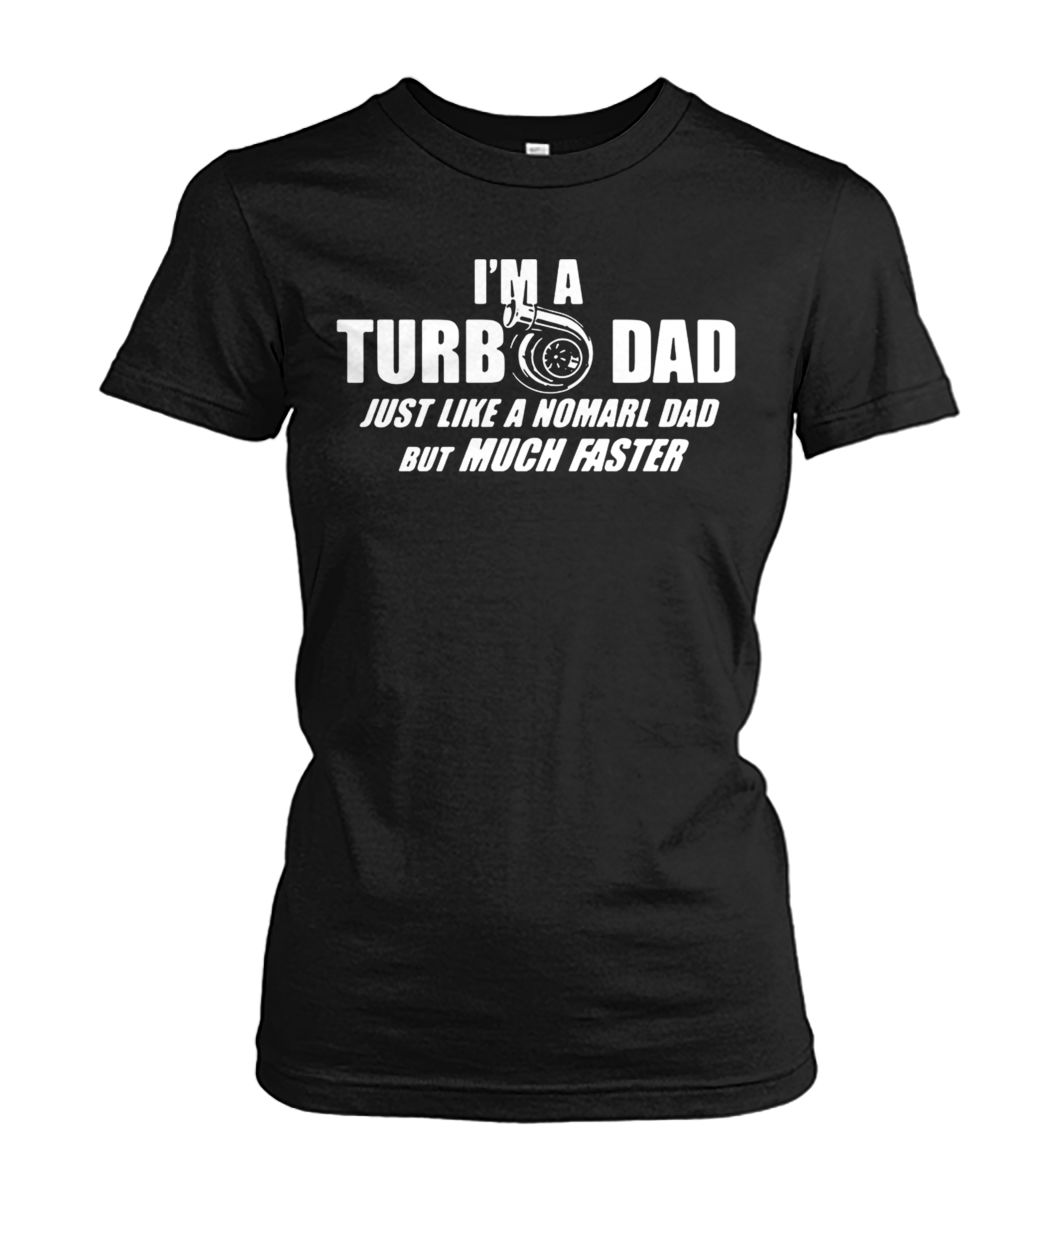 I'm a turbo dad just like a normal dad but much faster women's crew tee